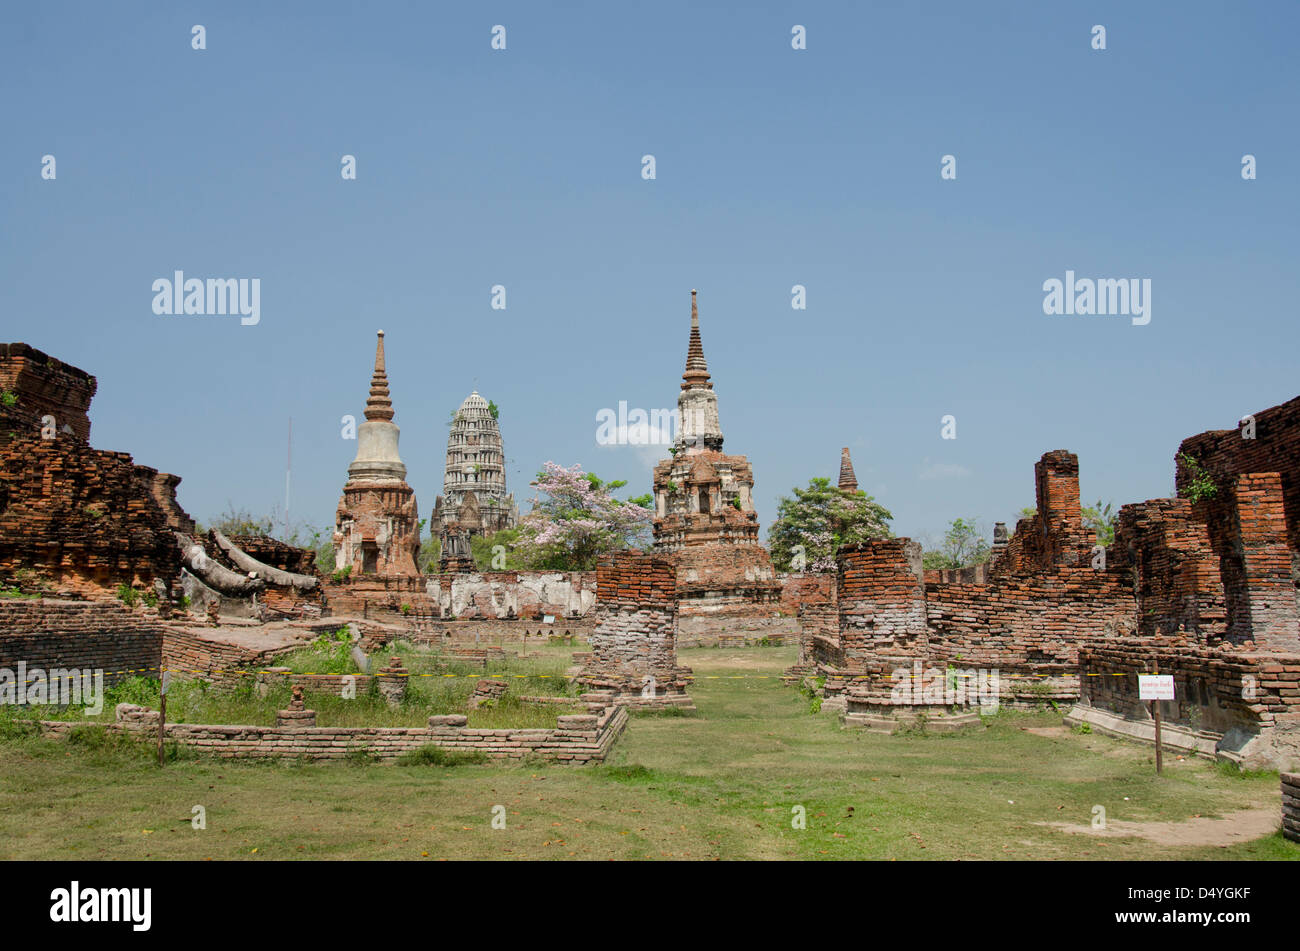 Thailand, Ayutthaya. Wat Mahathat. Traditional Thai bell-shaped Chedi or Stupa temples, with Prang wat in distance. Stock Photo